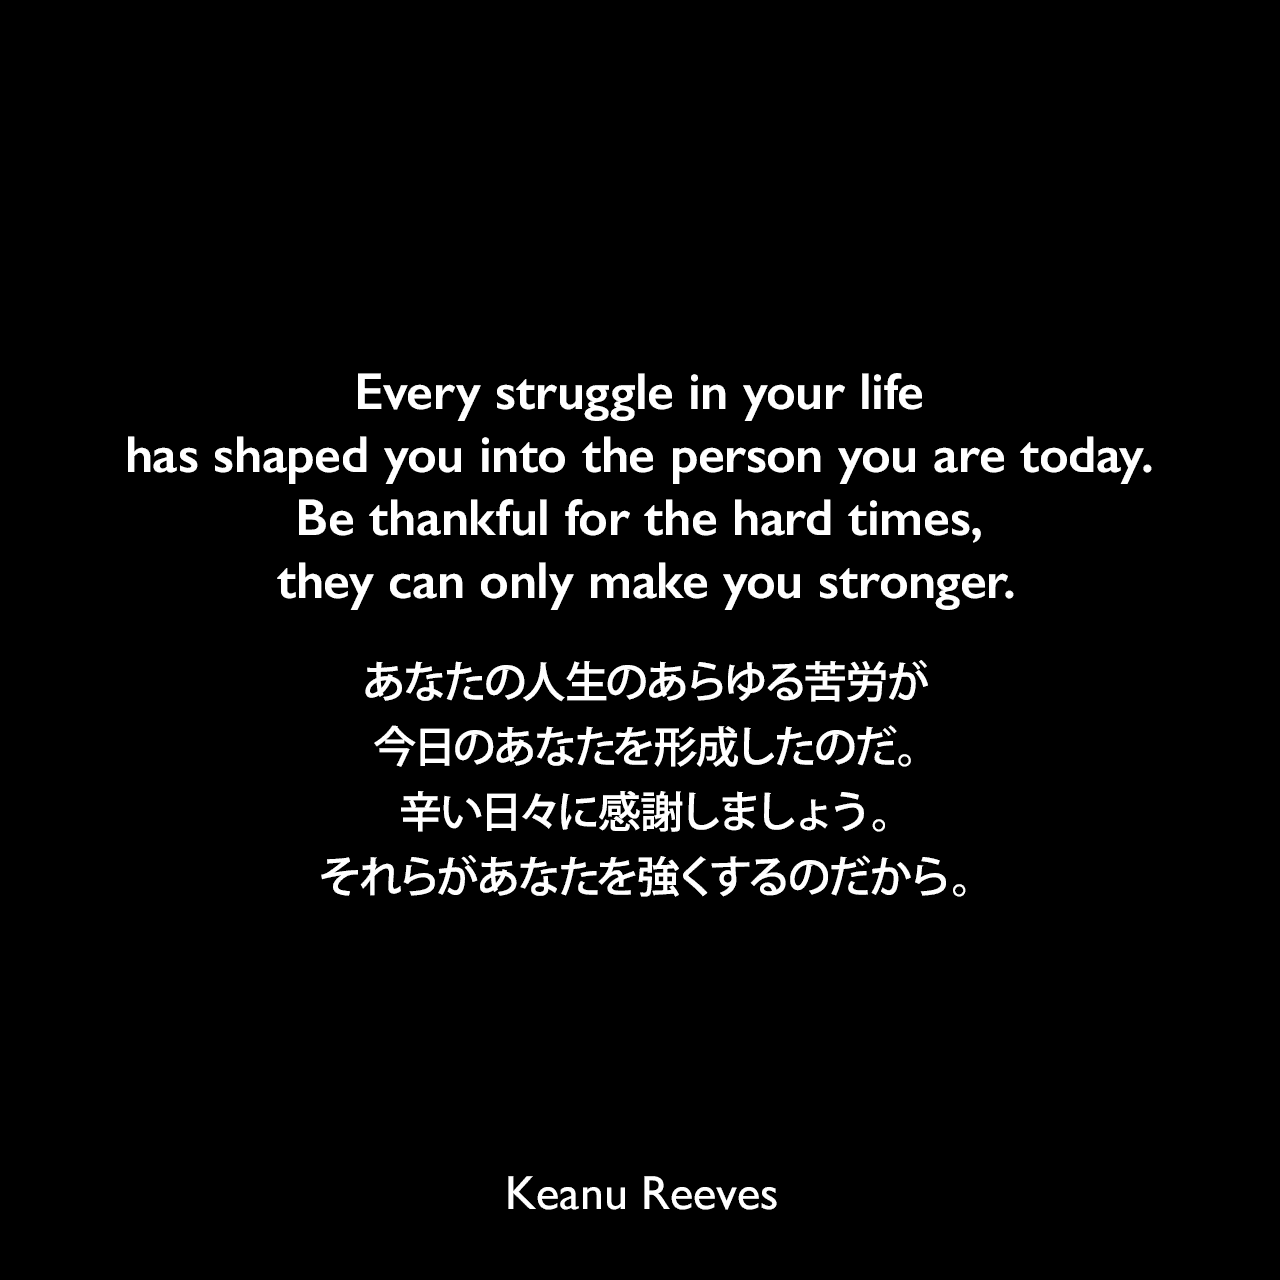 Every struggle in your life has shaped you into the person you are today. Be thankful for the hard times, they can only make you stronger.あなたの人生のあらゆる苦労が、今日のあなたを形成したのだ。辛い日々に感謝しましょう。それらがあなたを強くするのだから。Keanu Reeves